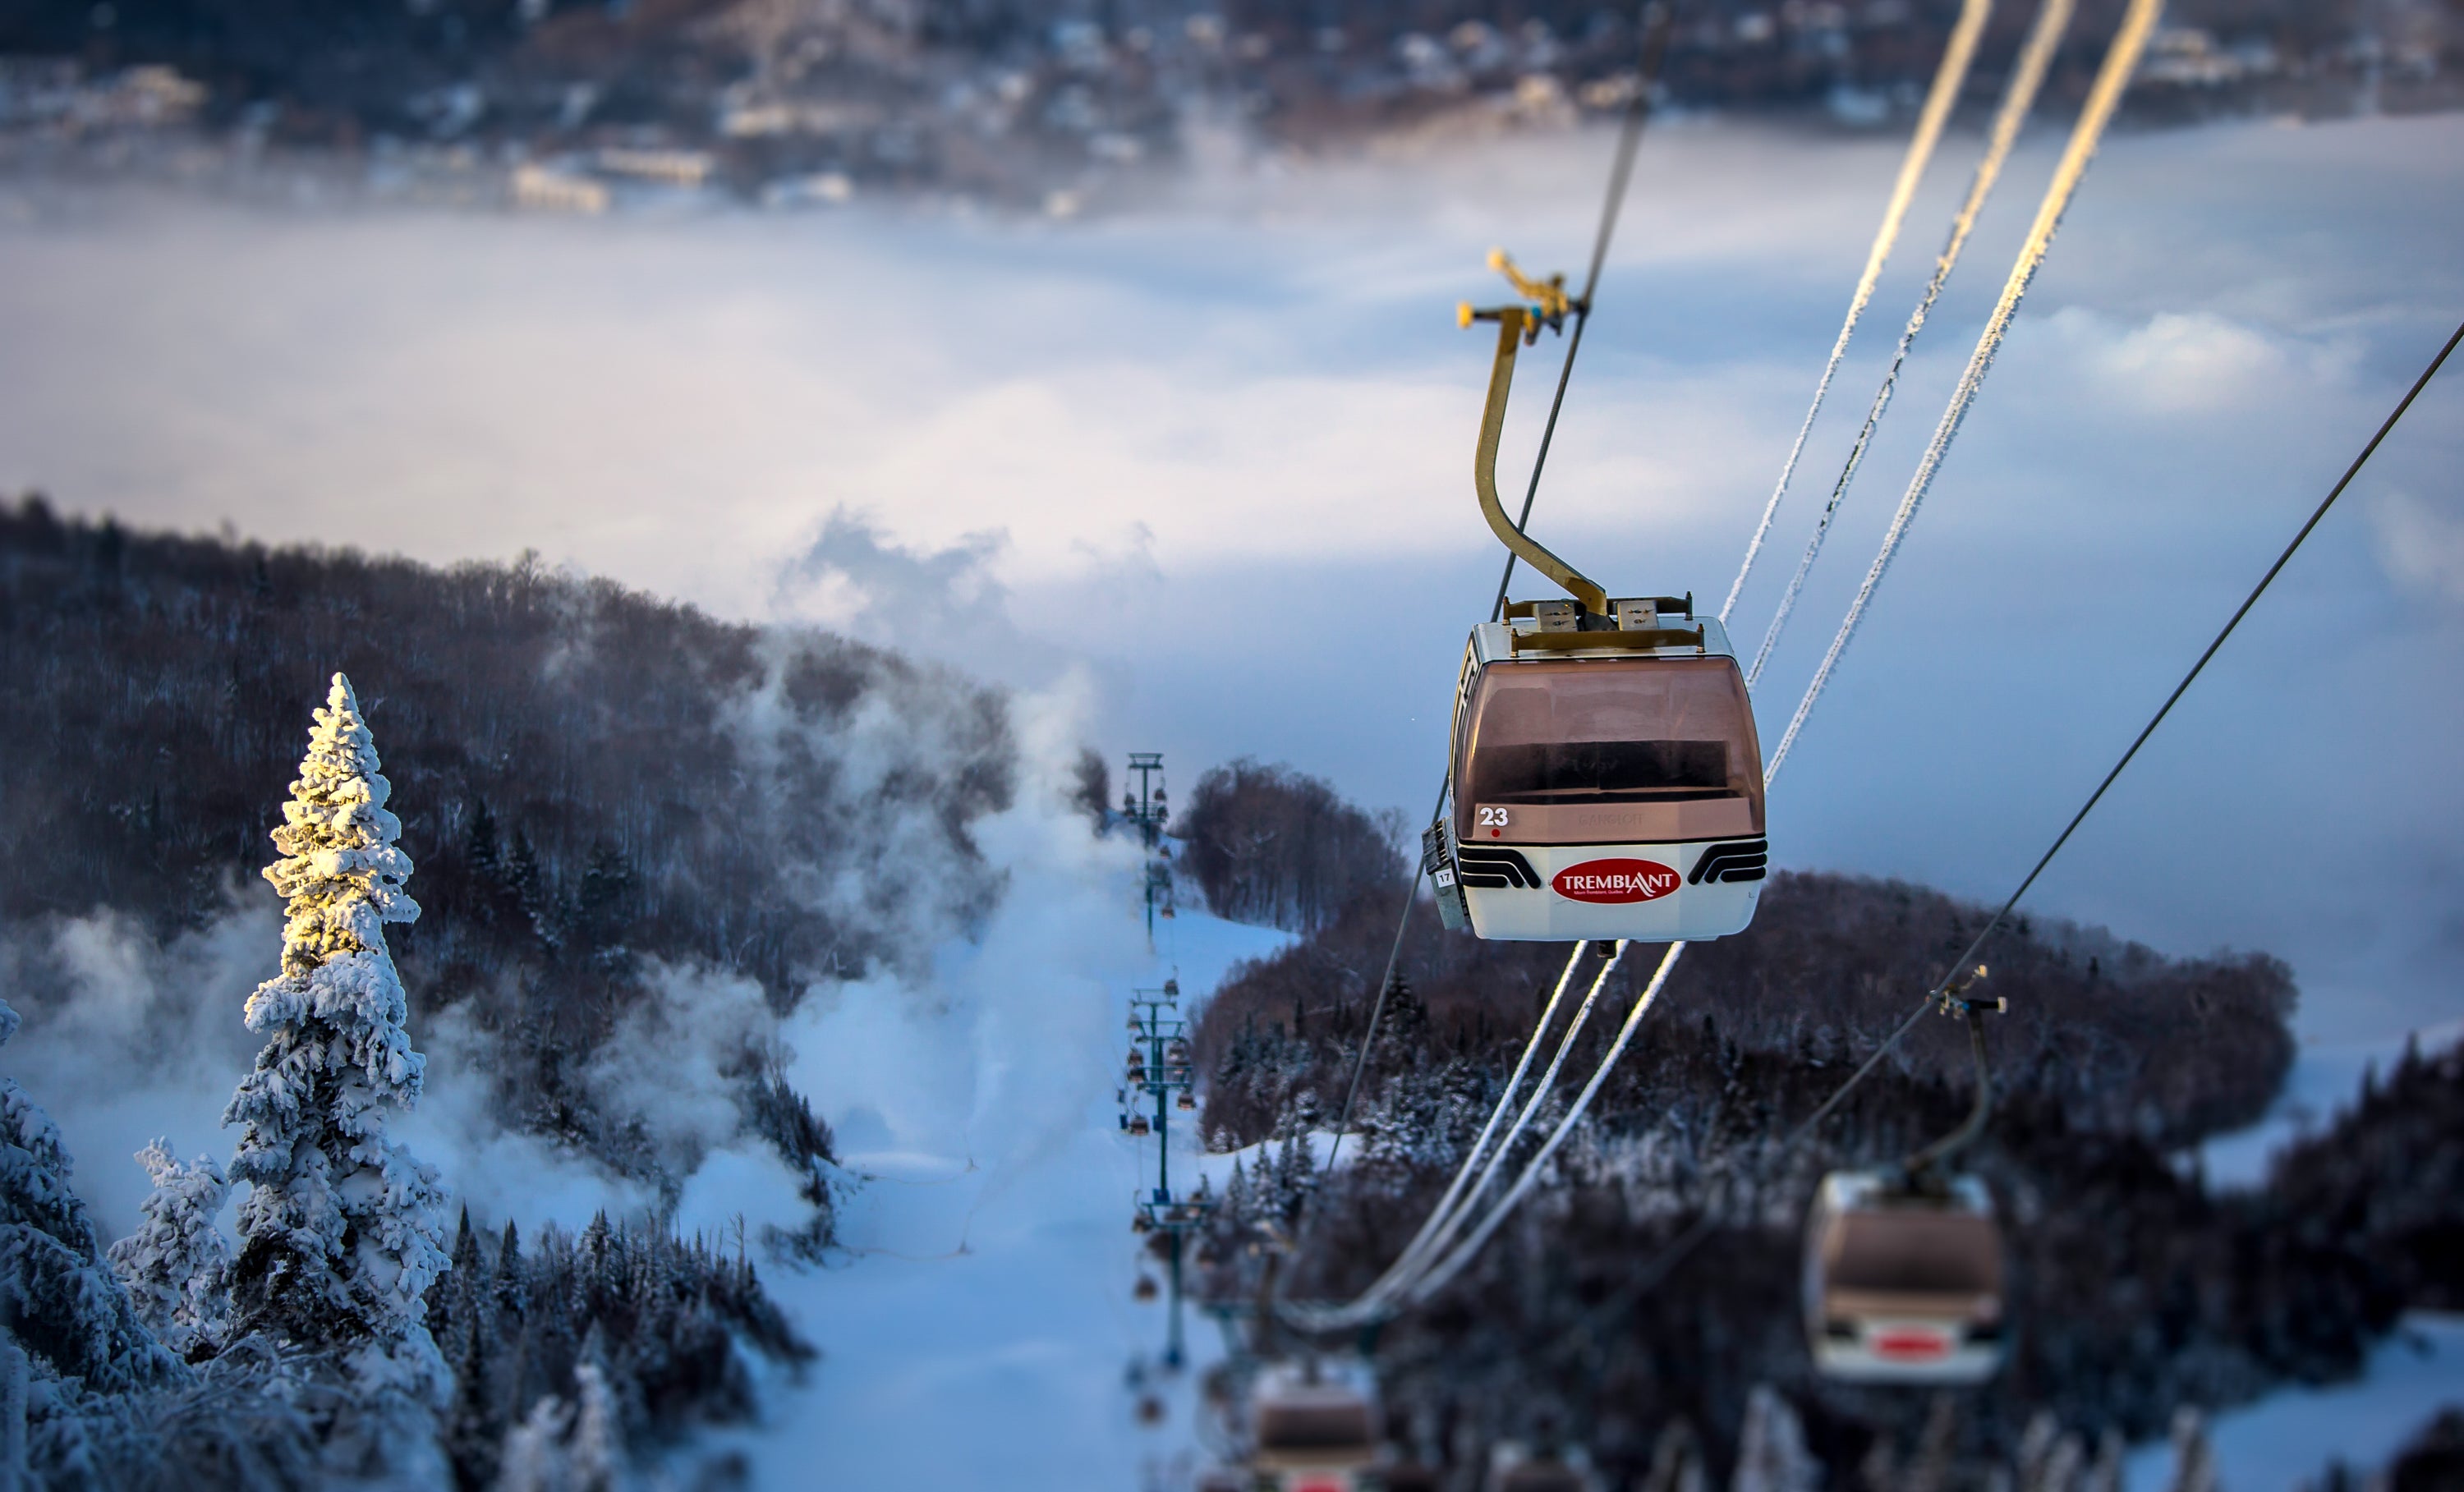 Best Places to Go for a Luxury Dream Ski Trip - Lifted by Ikon